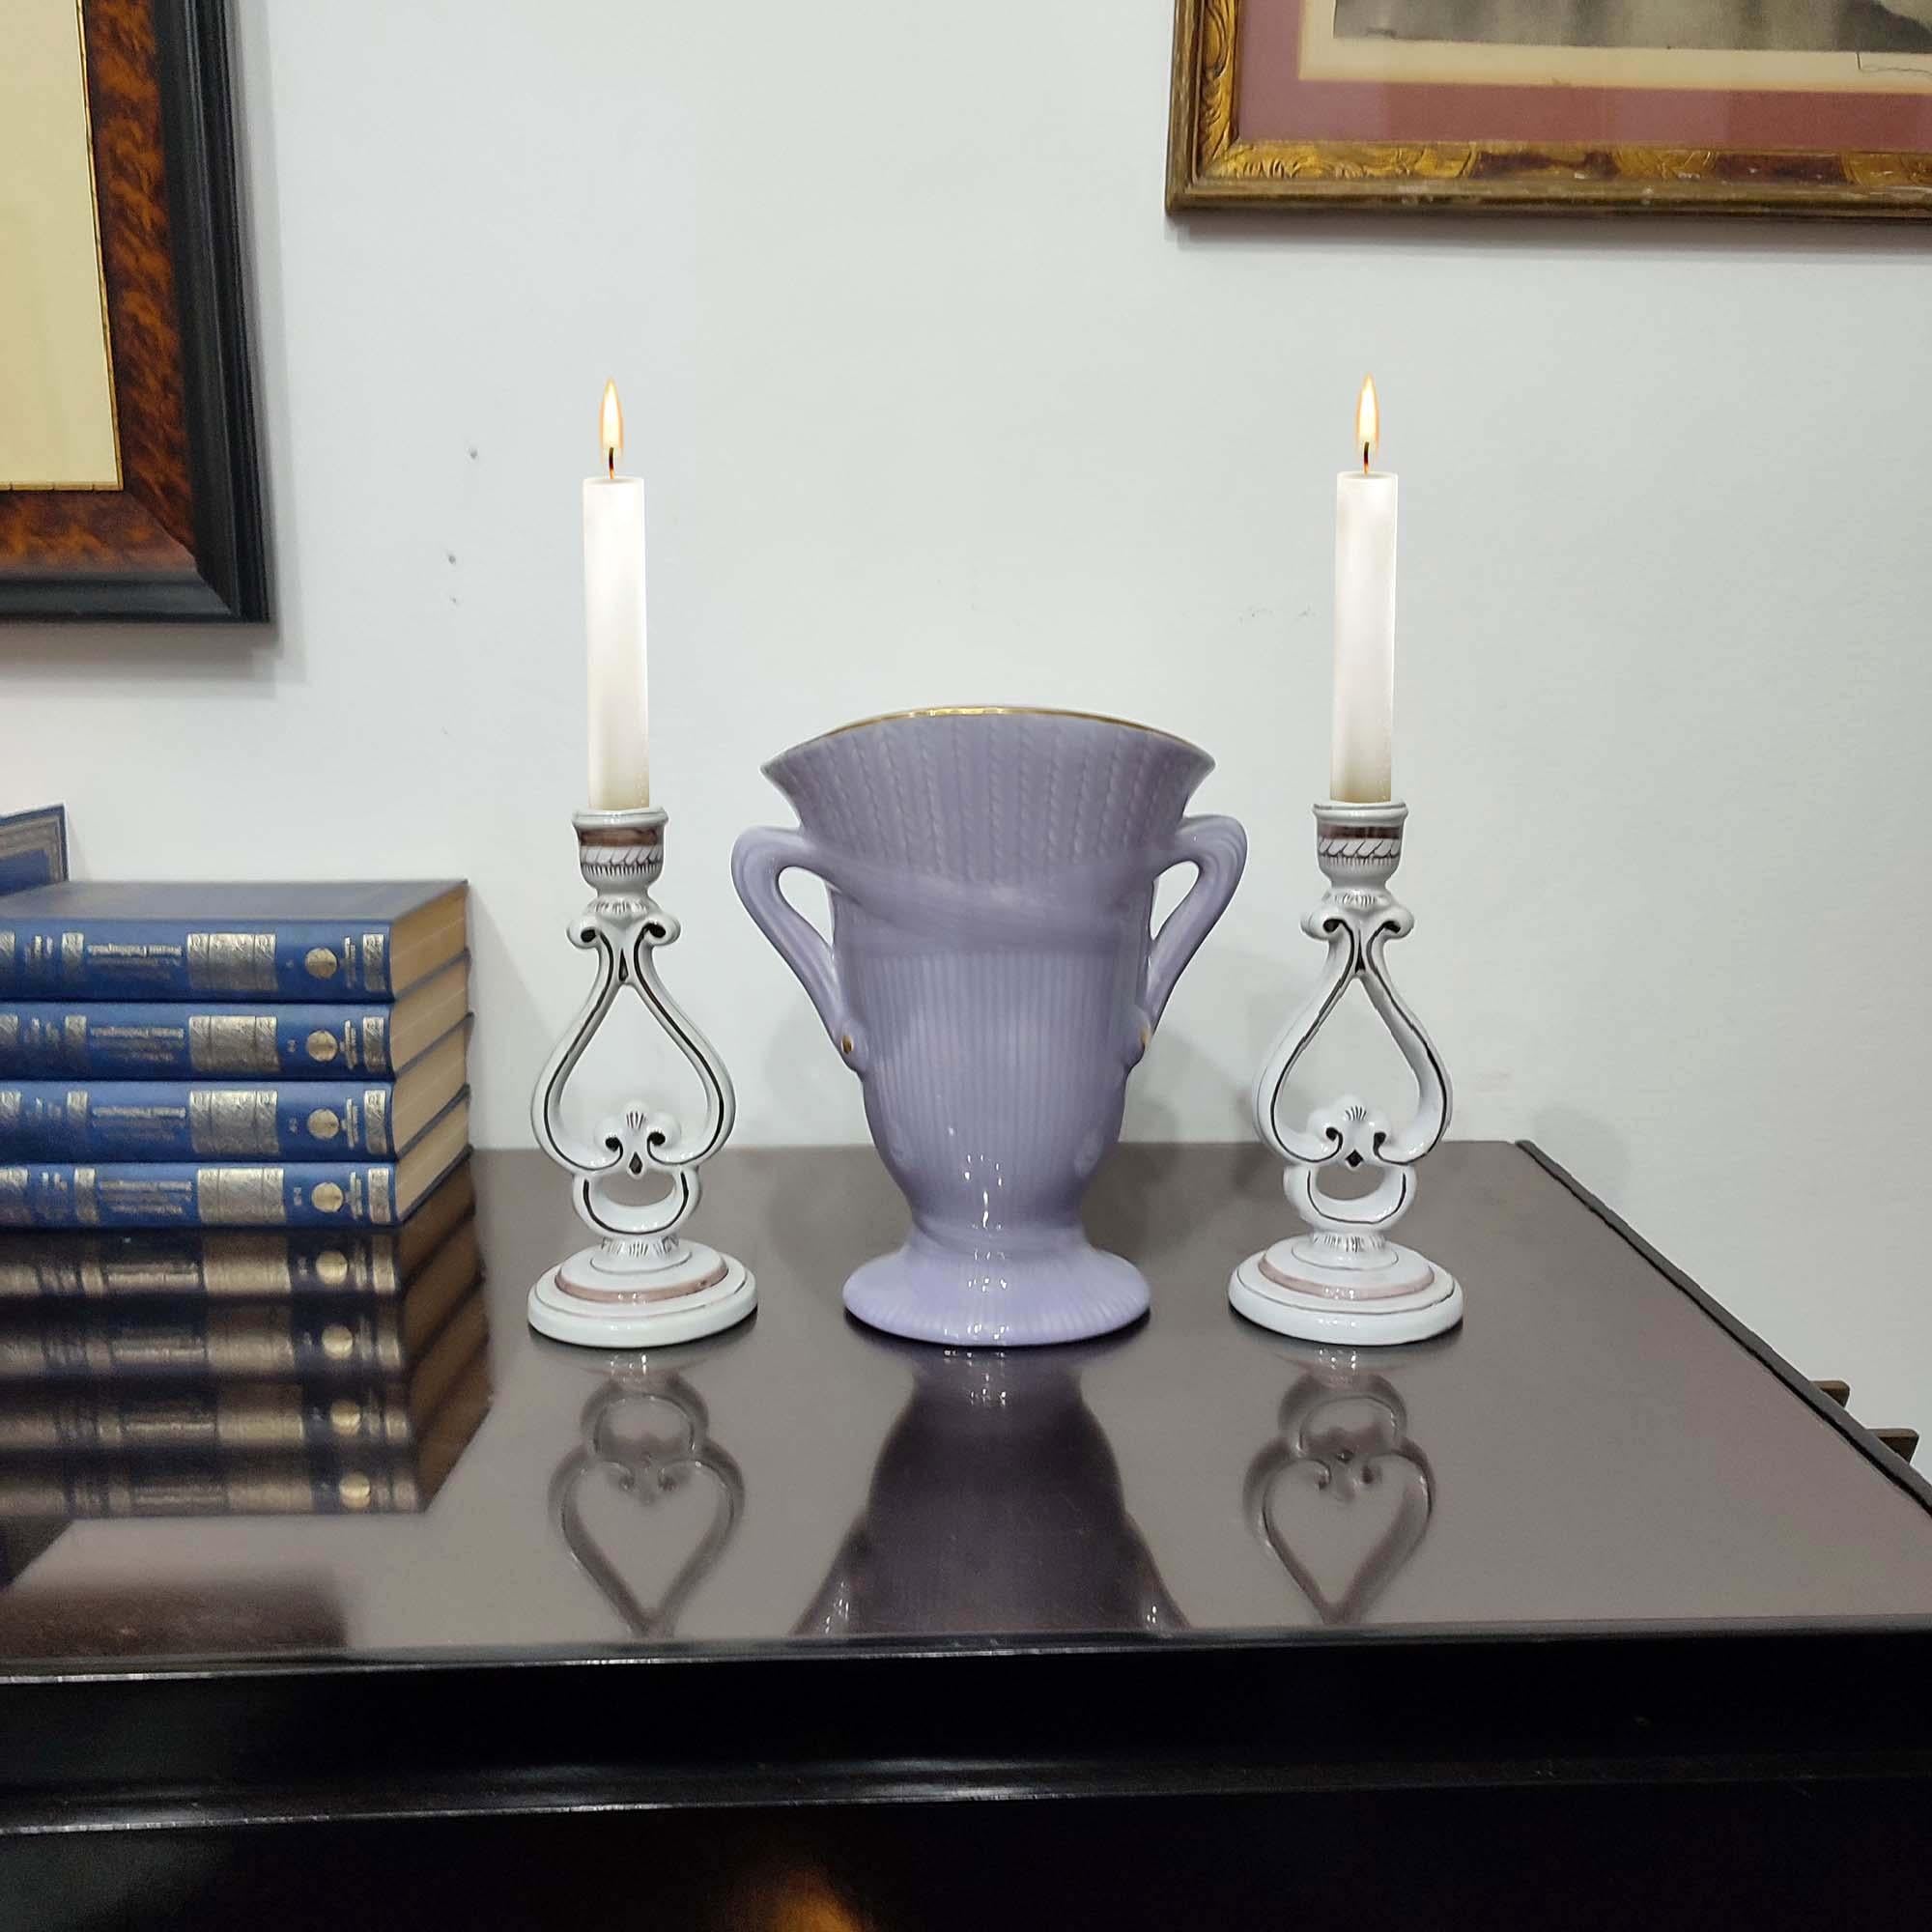 Museum items, very rare pair of ceramic candle holders designed by Arthur Percy, manufactured by Gefle. Made in Sweden in the 1920s.
Similar model exhibited at Länsmuseet Gävleborg.
Dimensions: height 22 cm.